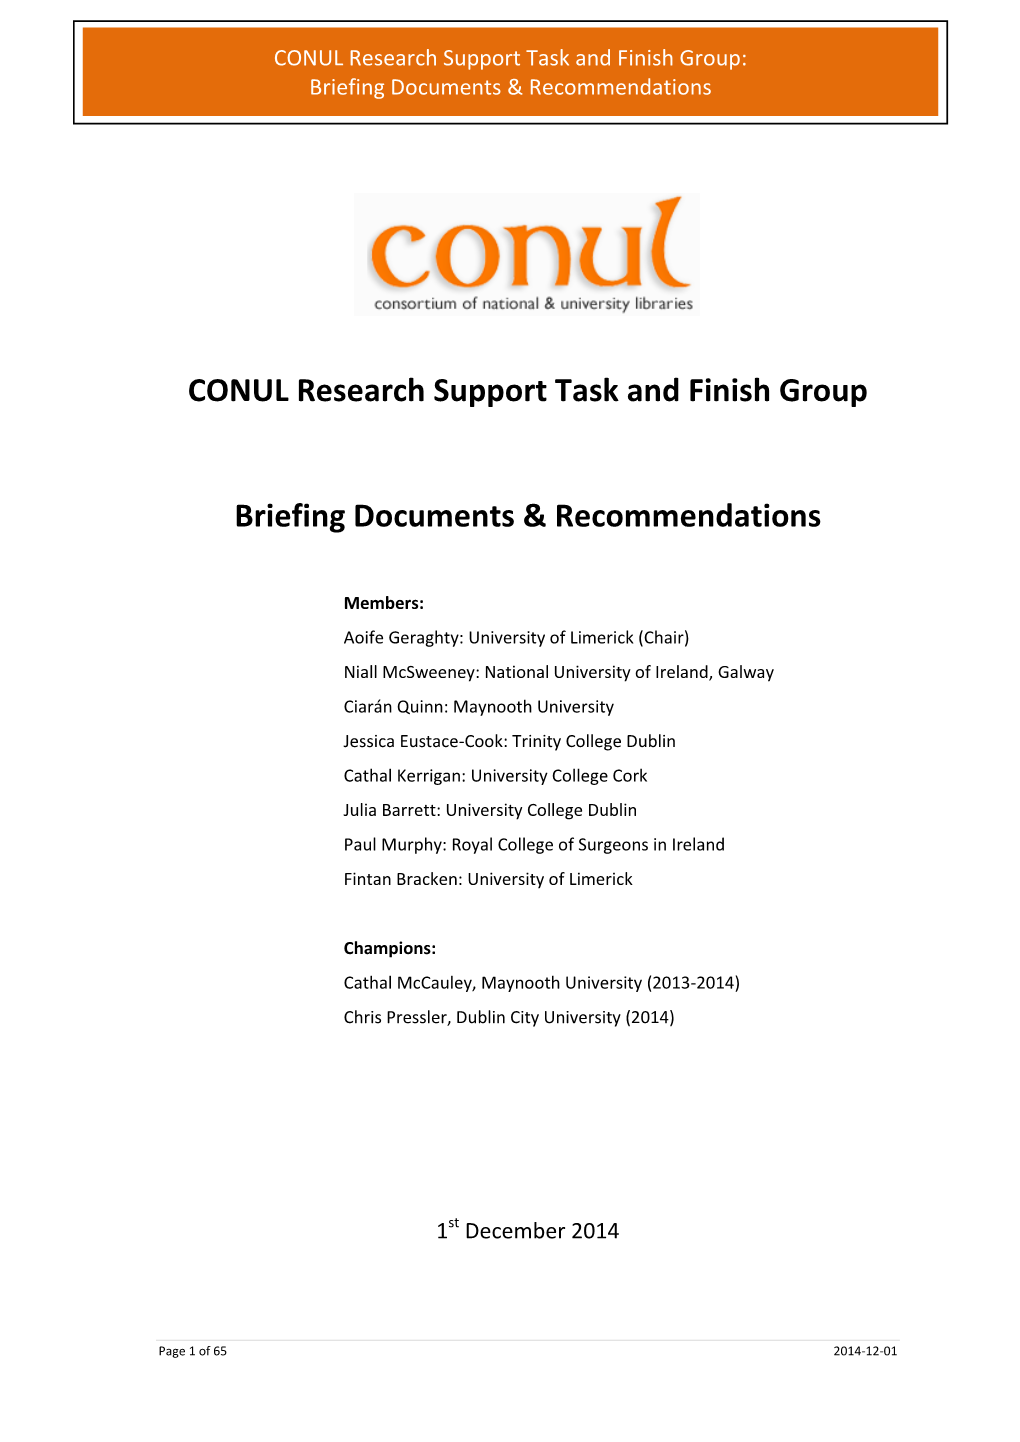 CONUL Research Support Task and Finish Group Briefing Documents